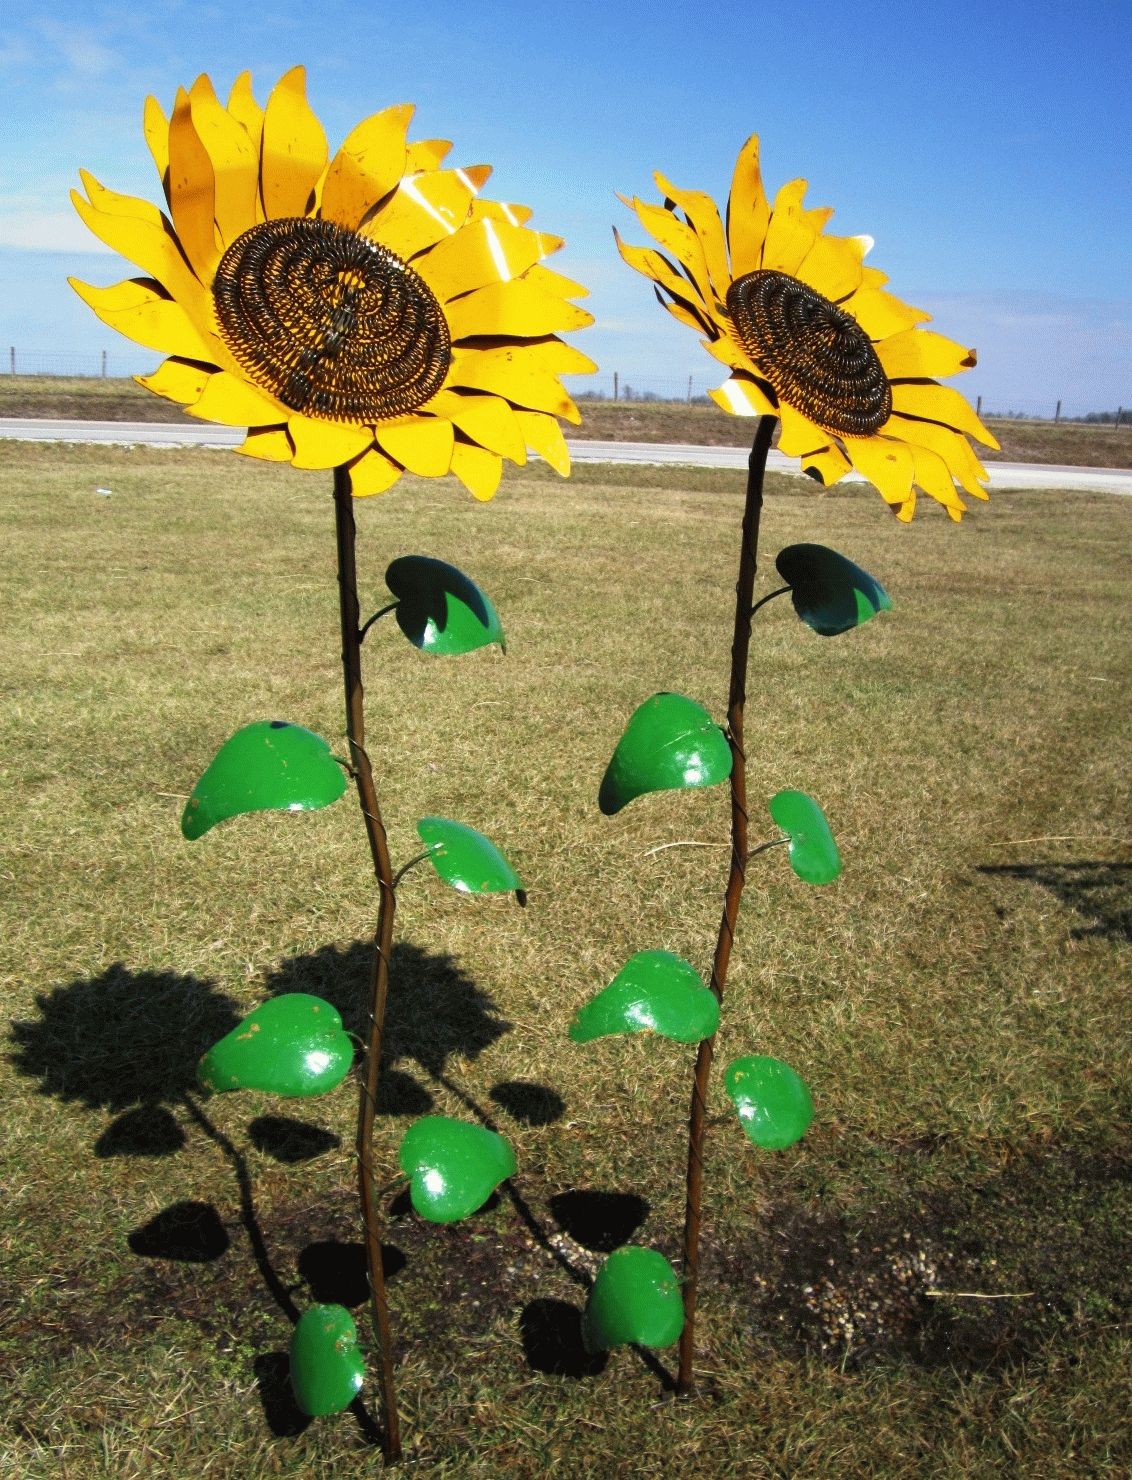 67" Recycled Metal Giant Sunflower Stake – Yard Decor For Best And Newest Metal Sunflower Yard Art (View 1 of 26)